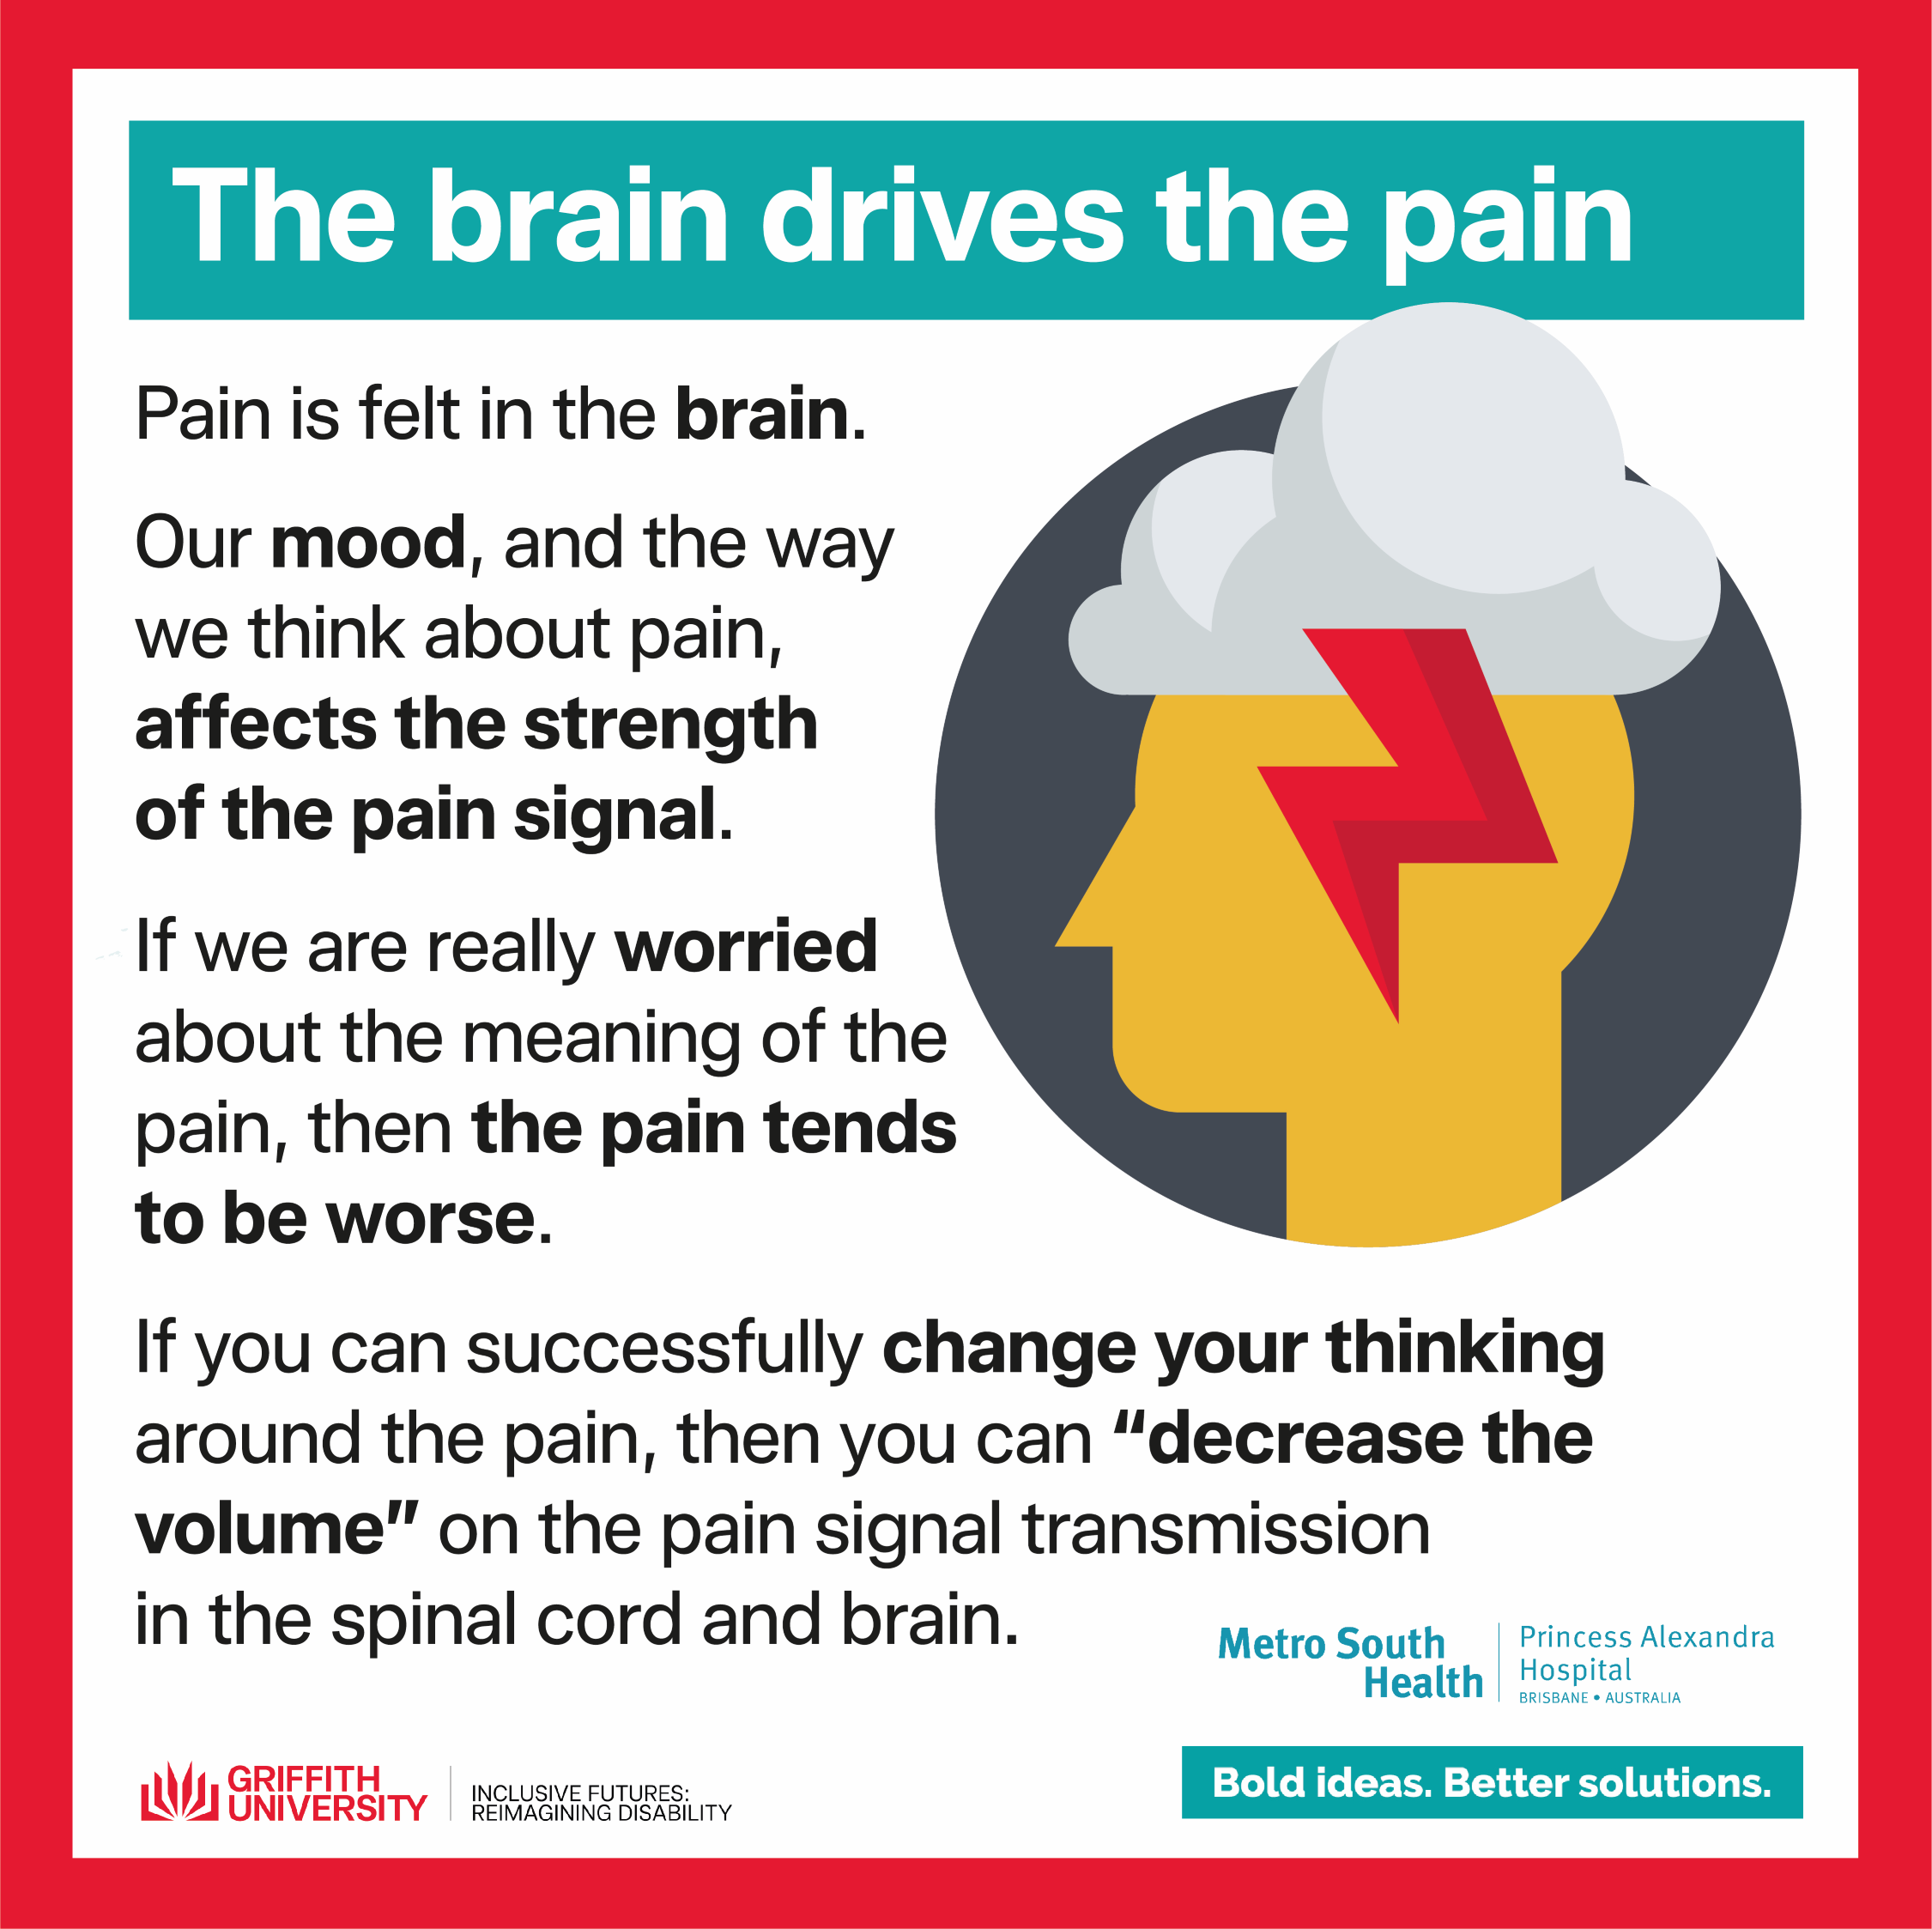 Infographic tile for National Pain Week 24 to 30 July, including a vector graphic of a grey circle with a yellow head and cloud with a red lightening symbol, indicating pain in the brain.  Text is the same as in the caption abolve. The bottom of the tile features the Griffith University Inclusive Futures: Reimagining Disability Logo at the bottom The Hopkins Centre lockup featuring the logos Griffith University, Menzies, Metro Health South, Queensland Government and the tagline Bold ideas. Better solutions.